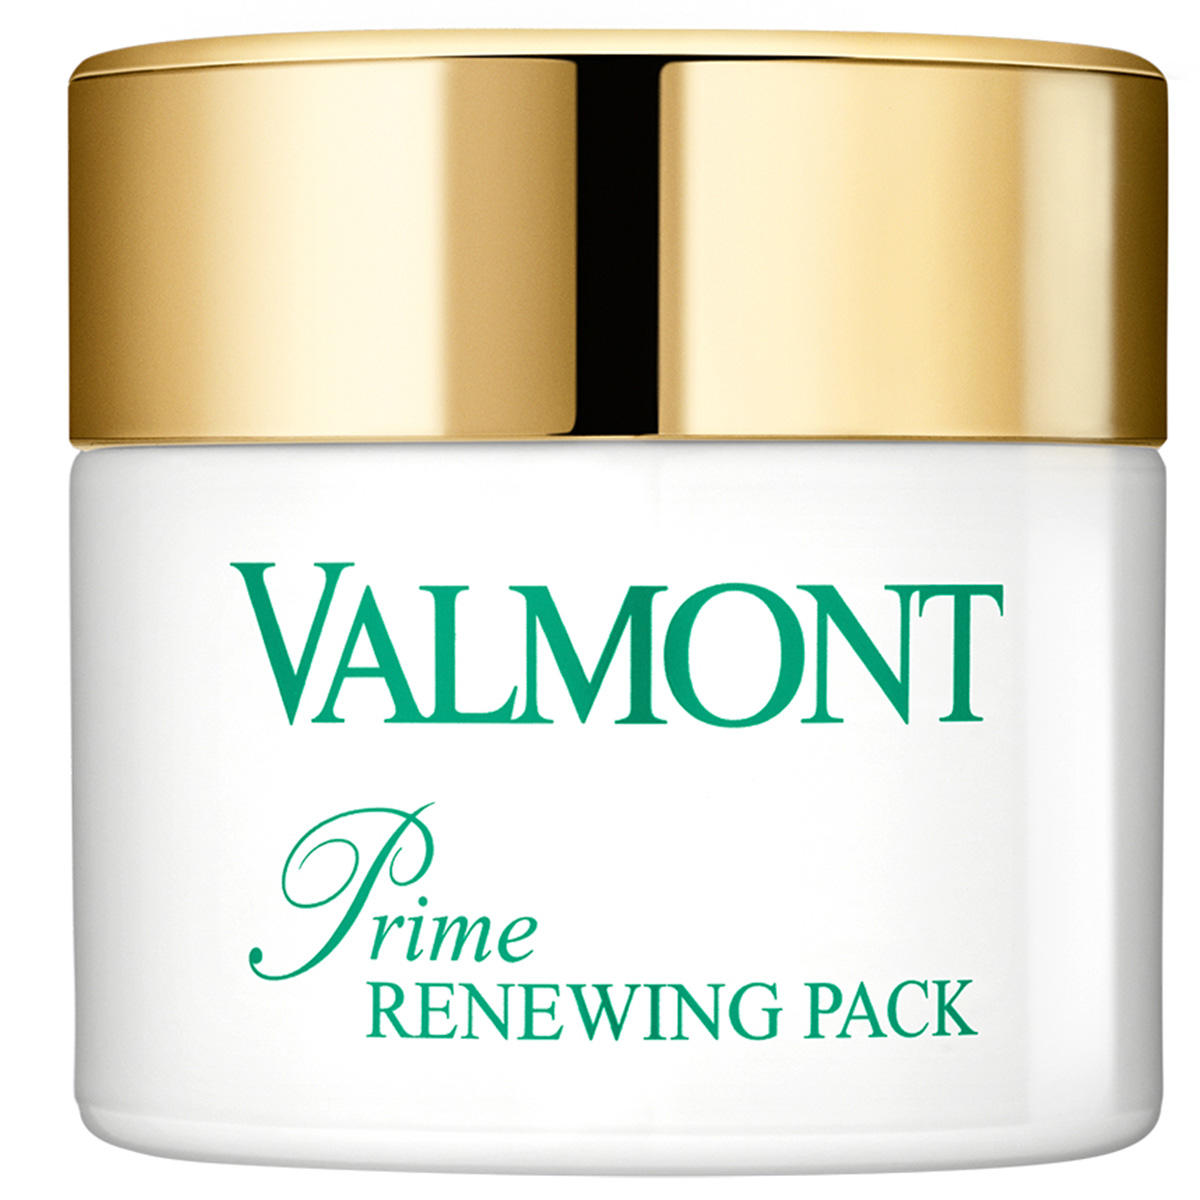 Valmont Prime Renewing Pack 75 ml - 1